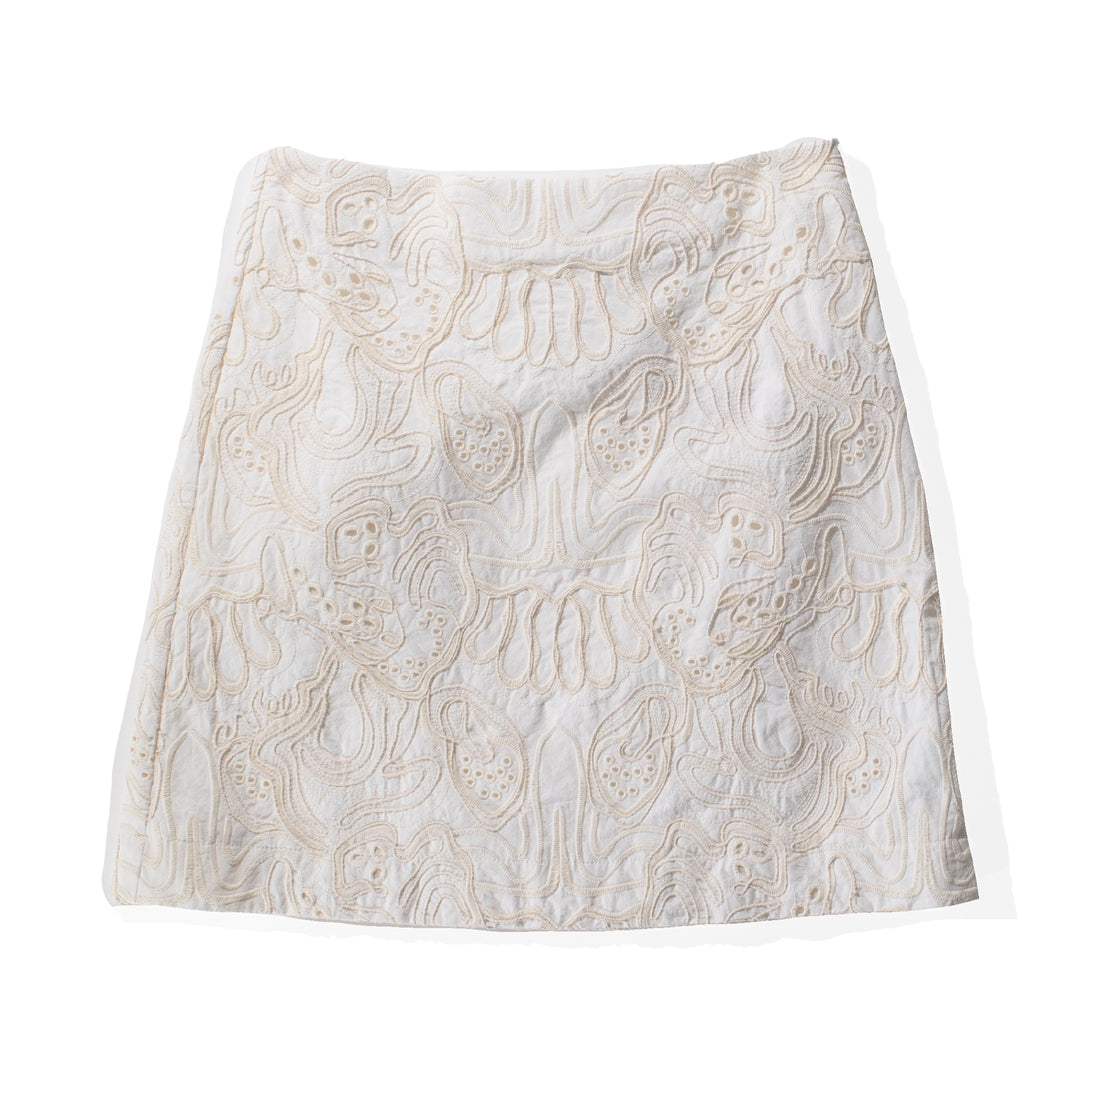 Rodebjer Piano Skirt in Off White